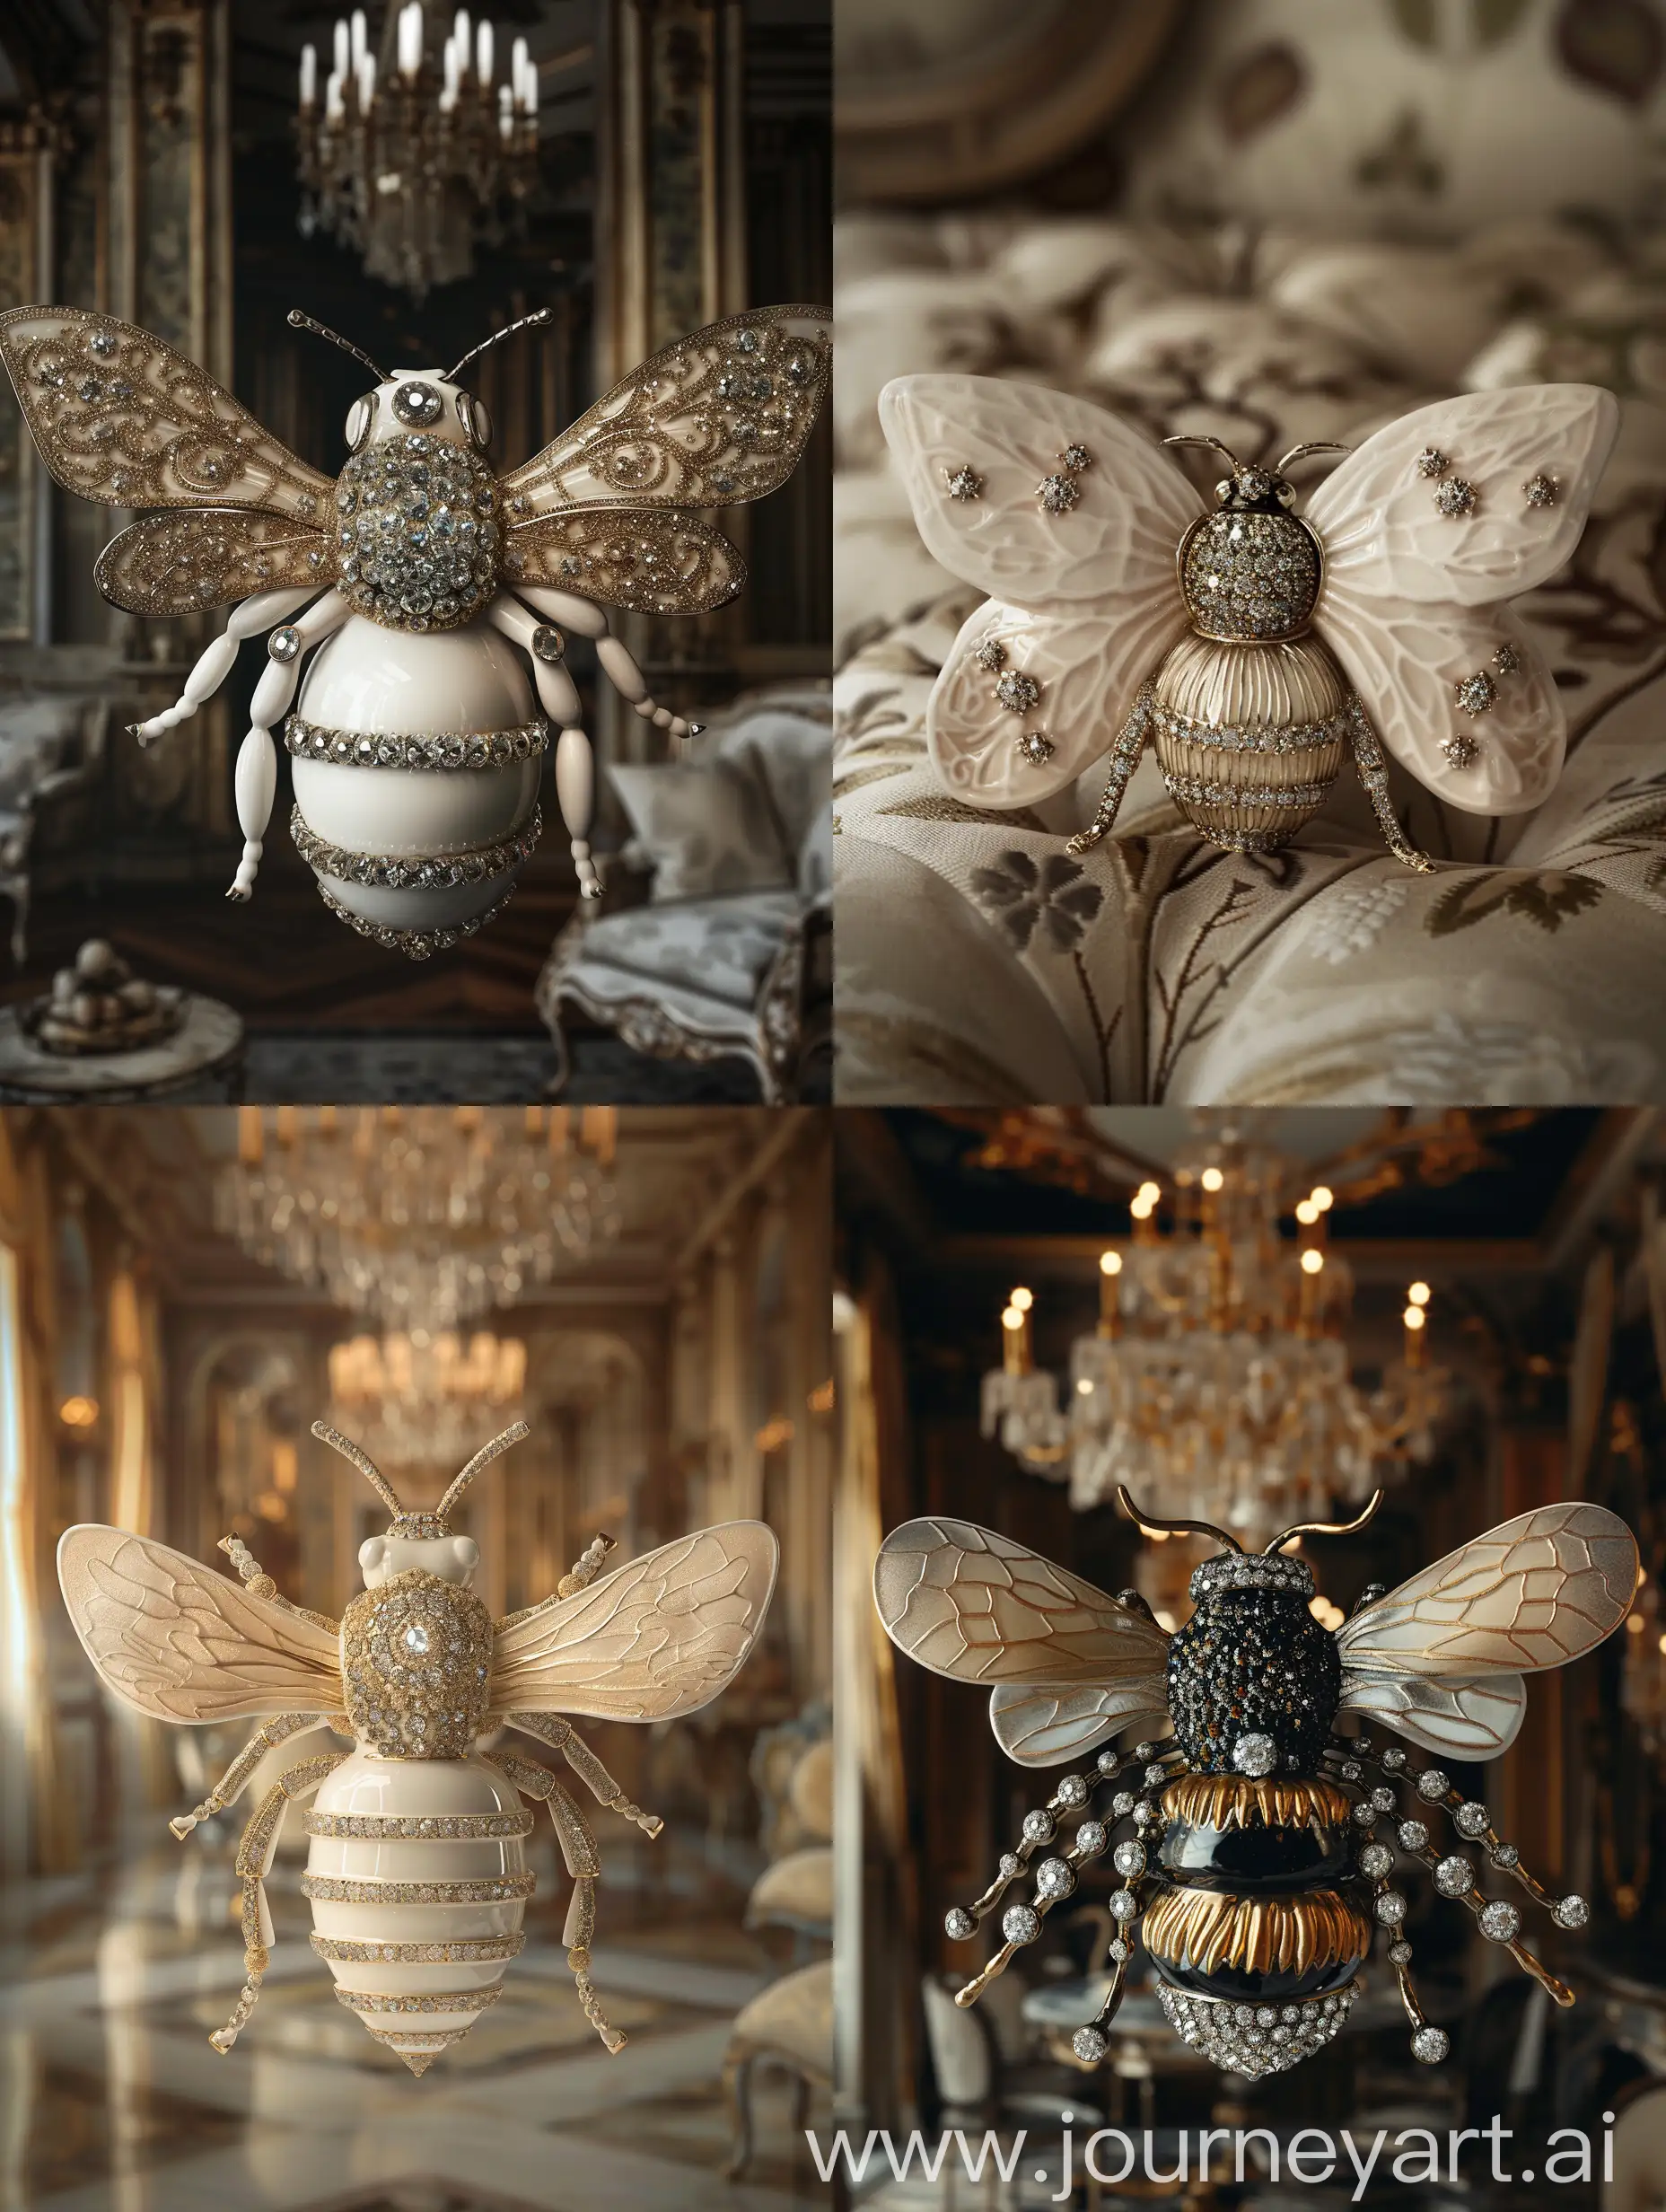 Luxury-Porcelain-Bee-Decor-with-Diamond-Accents-for-Sophisticated-Home-Ambiance